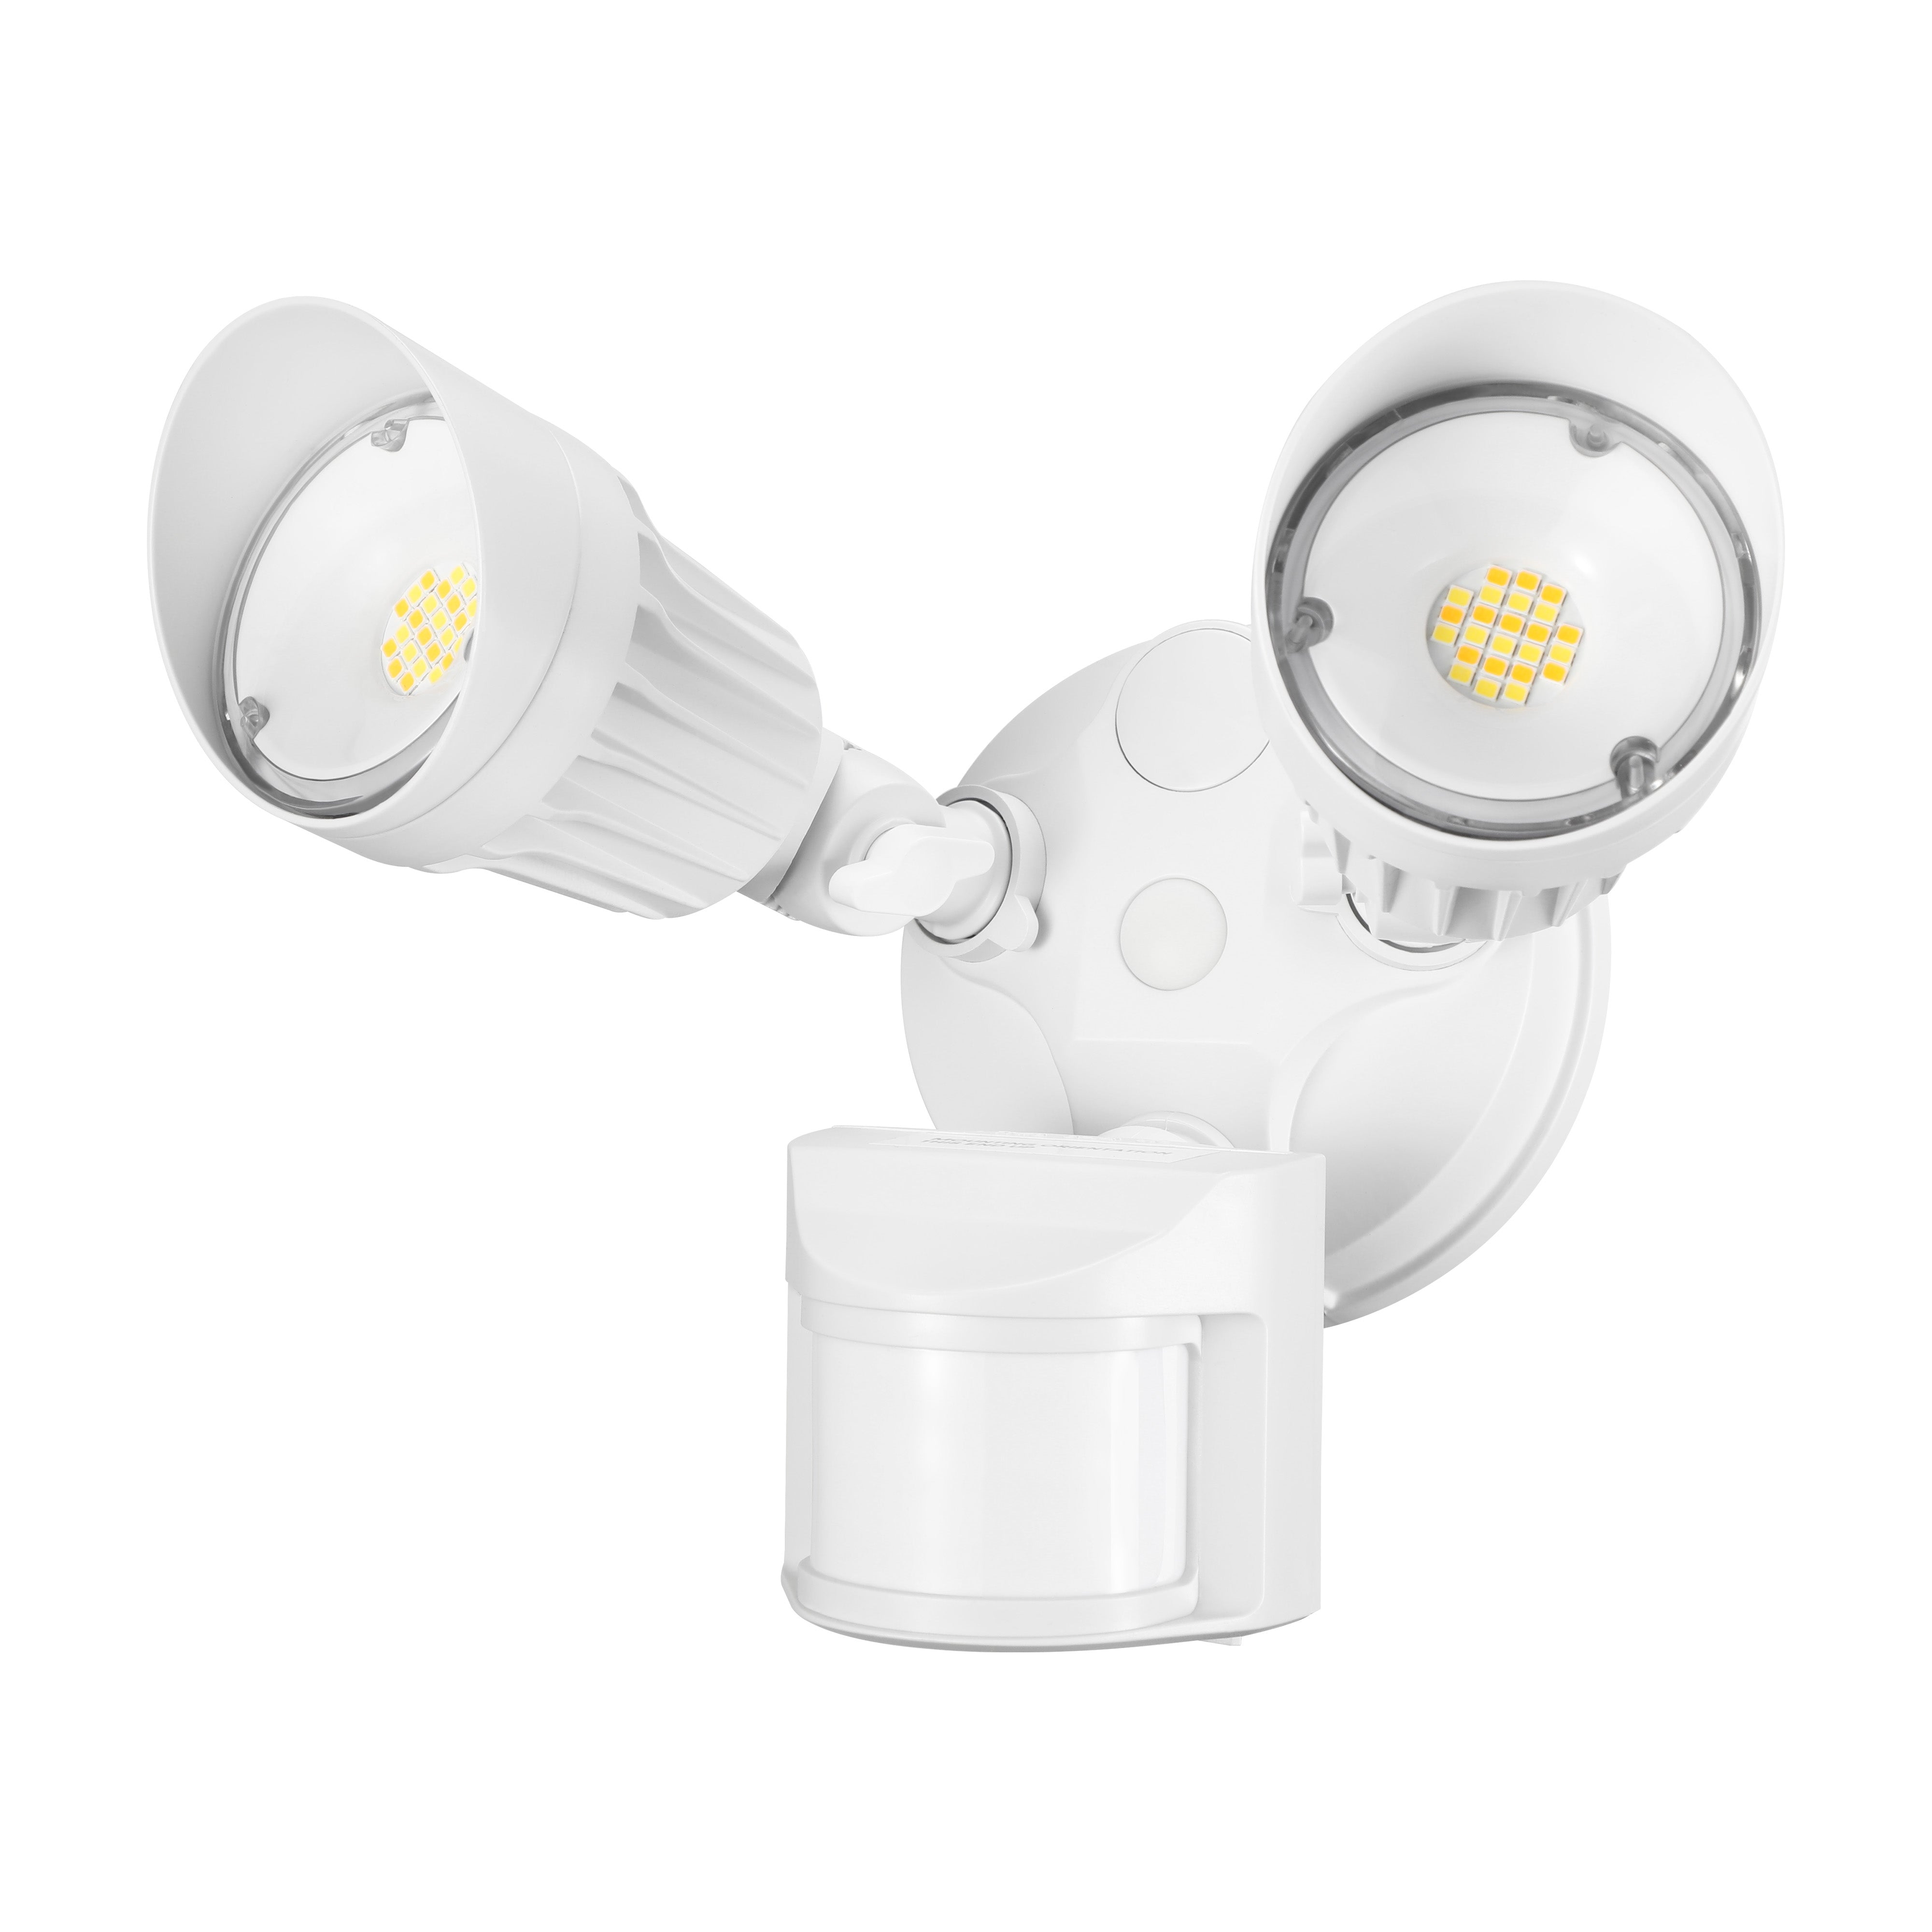 Watchman+ Dual-Heads 25W LED Security Light - White - Adjustable CCT